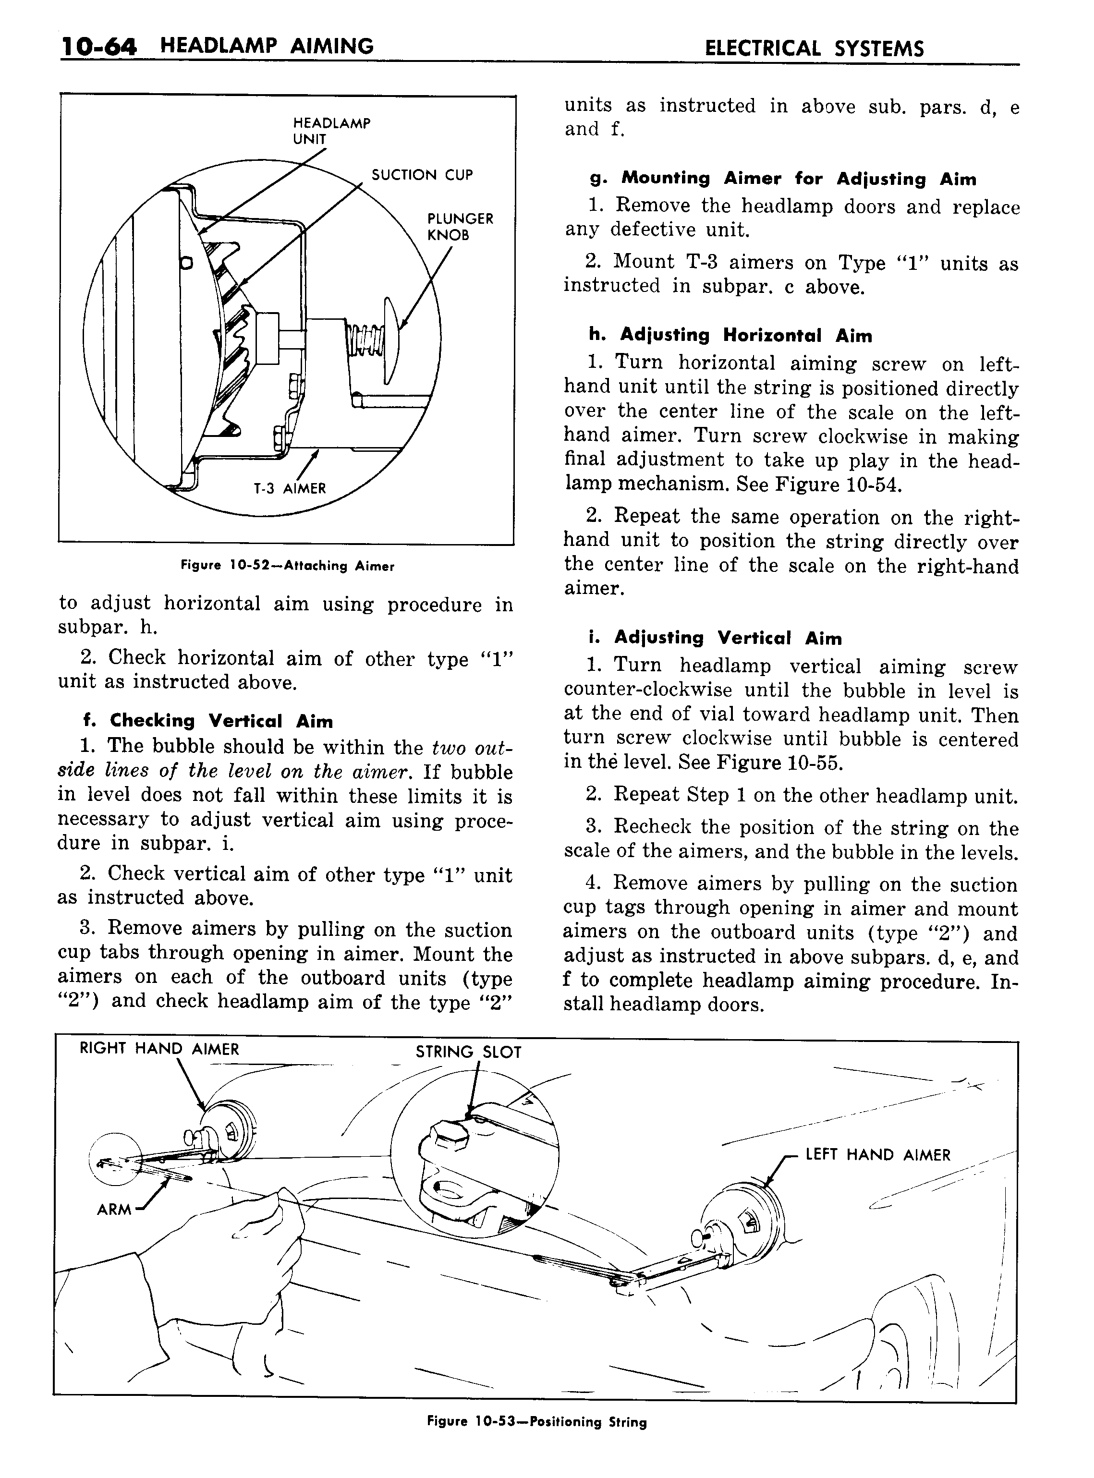 n_11 1960 Buick Shop Manual - Electrical Systems-064-064.jpg